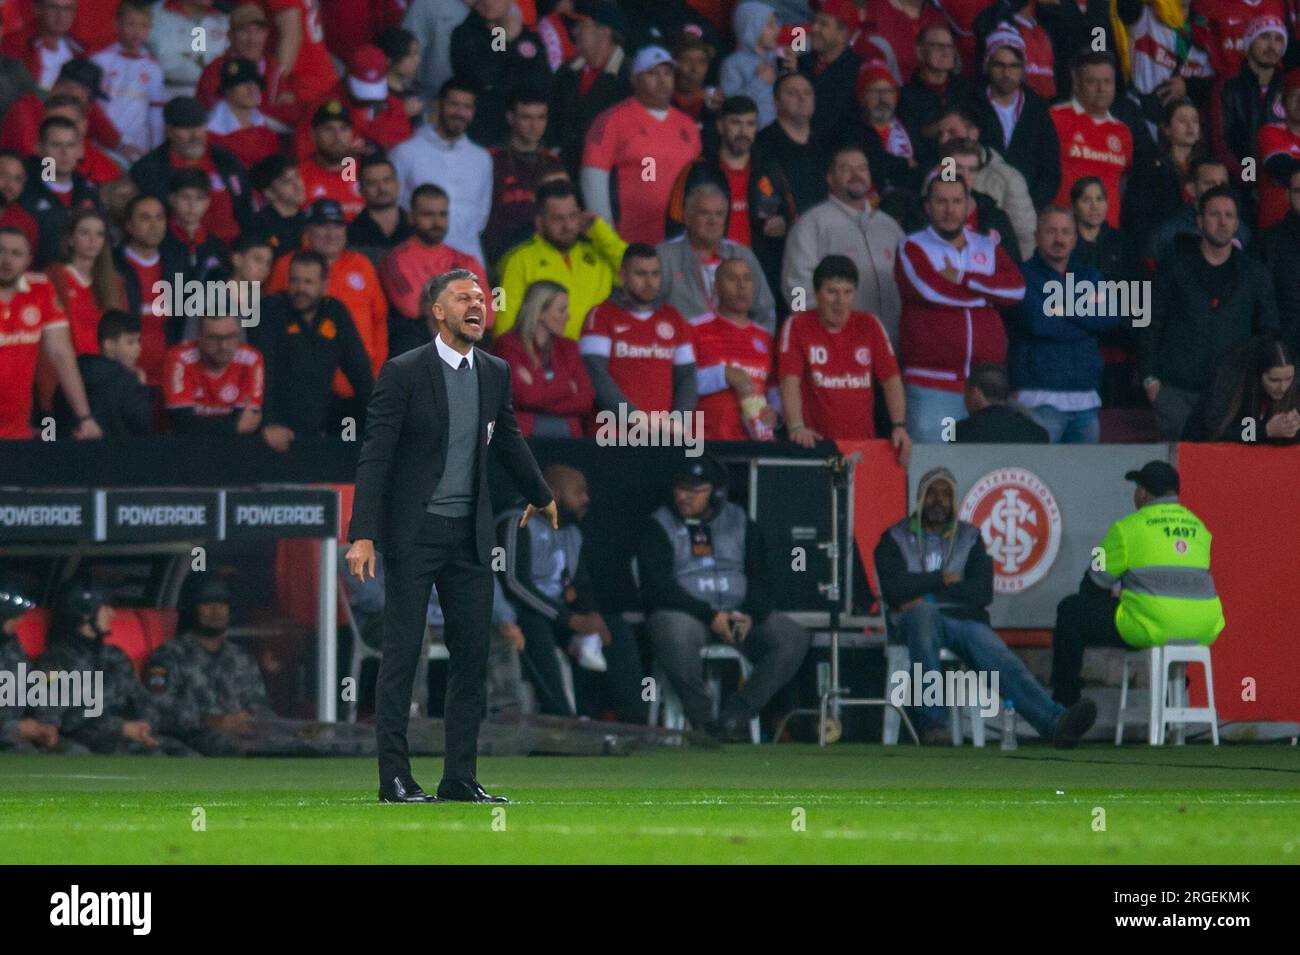 Porto Alegre, Brazil. 08th Aug, 2023. River Plate manager Martín Demichelis, during the match between Internacional and River Plate (ARG) for the 2st leg of round 16 of Libertadores 2023, at Beira-Rio Stadium, in Porto Alegre, Brazil on August 08. Photo: Max Peixoto/DiaEsportivo/Alamy Live News Credit: DiaEsportivo/Alamy Live News Stock Photo